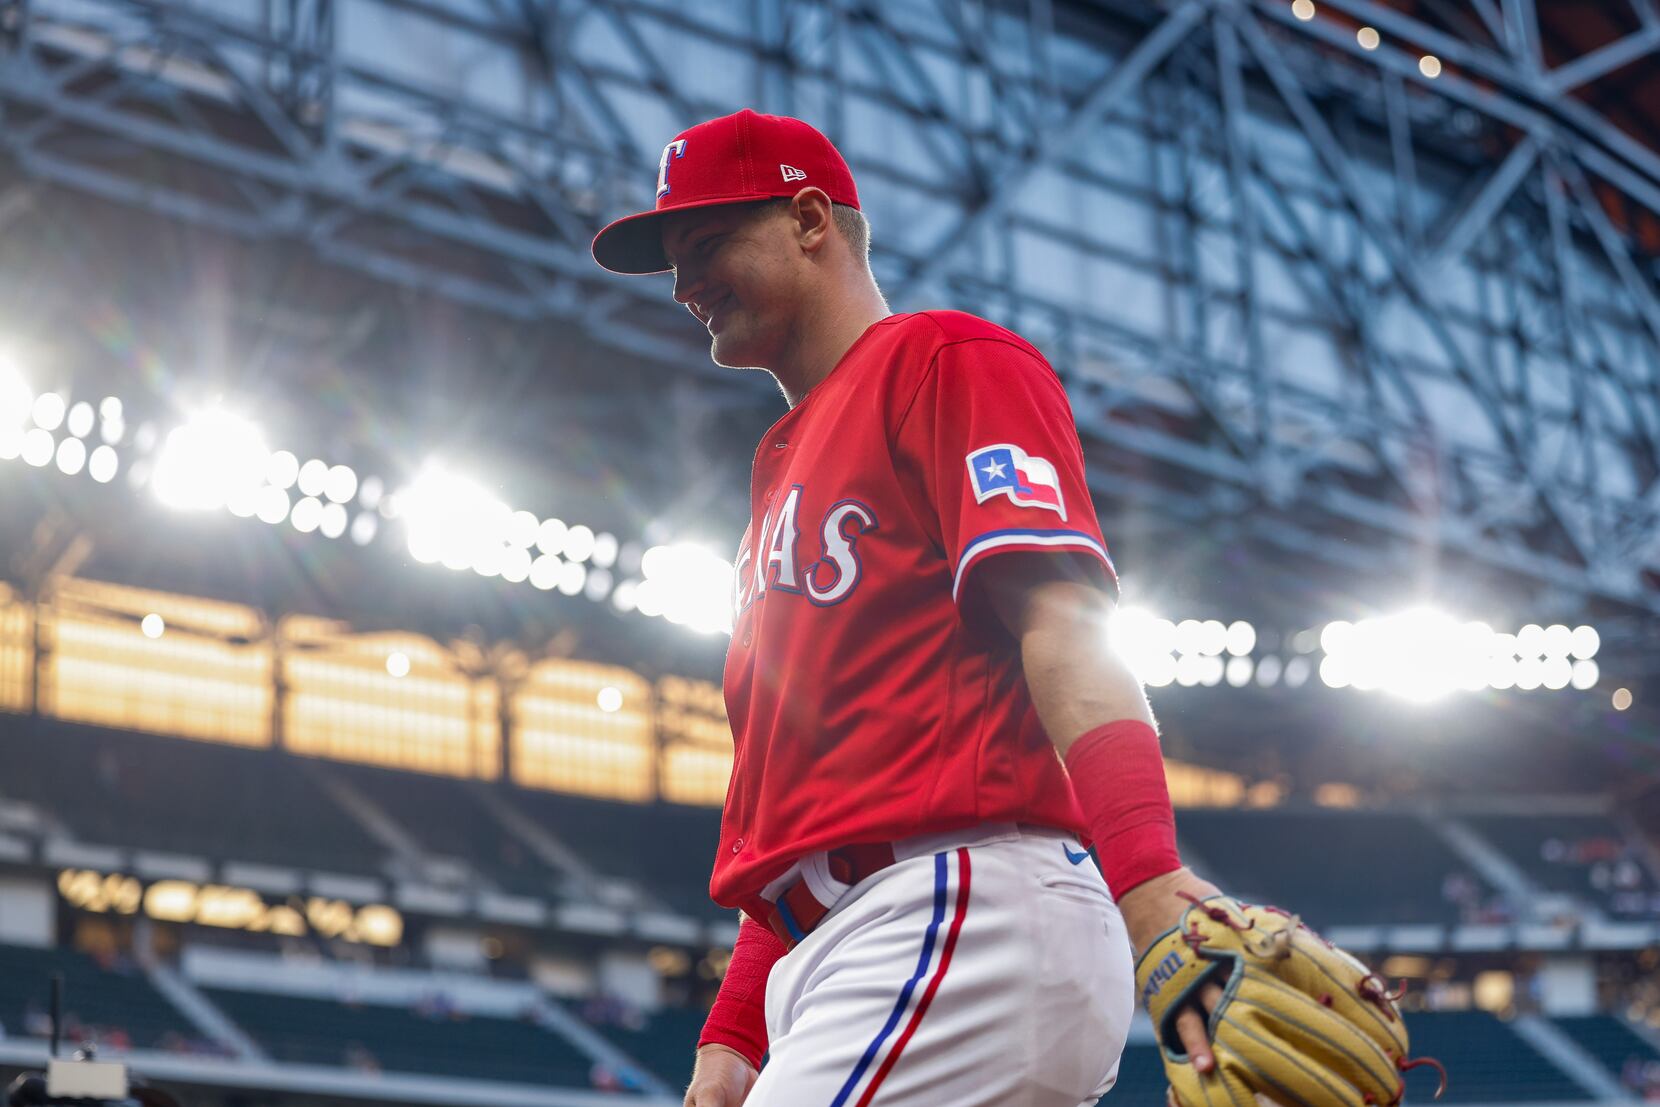 For the Metroplex': Texas Rangers drop hype video for new City